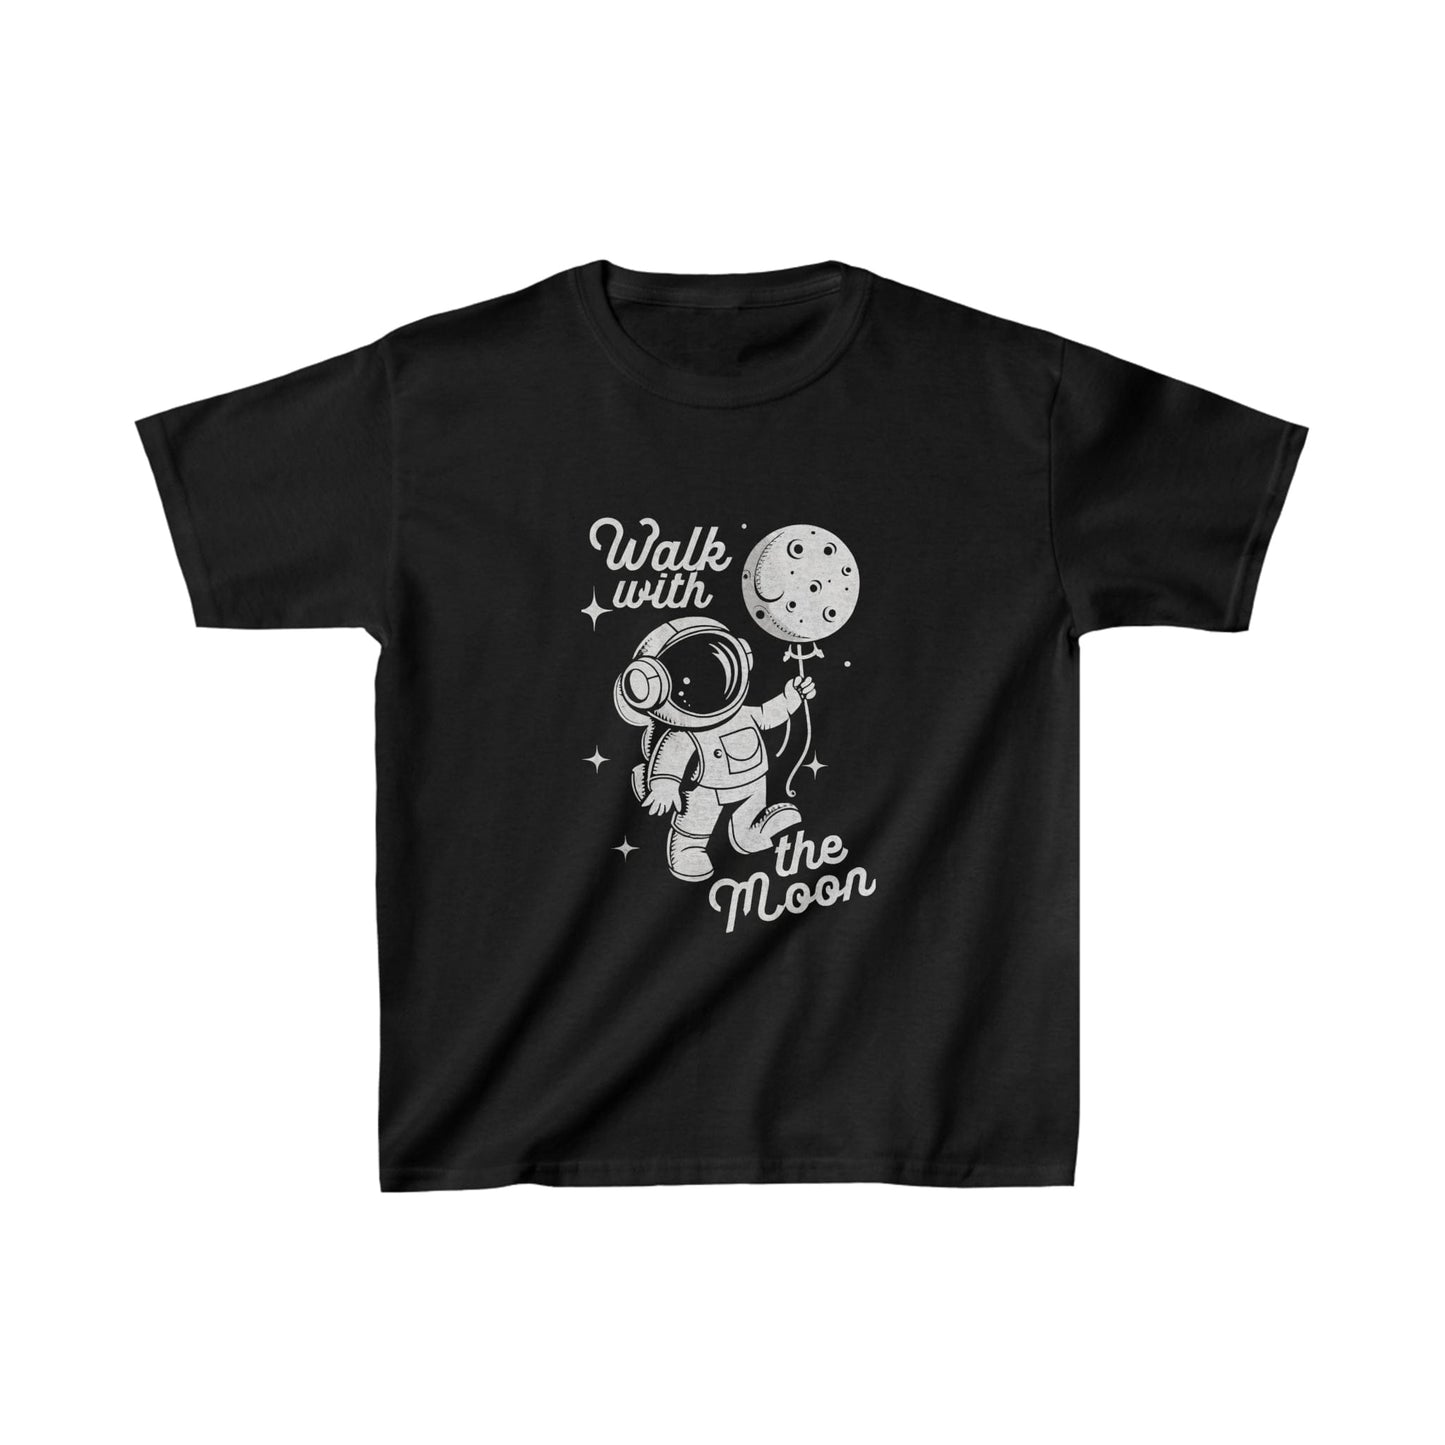 Kids clothes XS / Black Youth Walk with the Moon T-Shirt